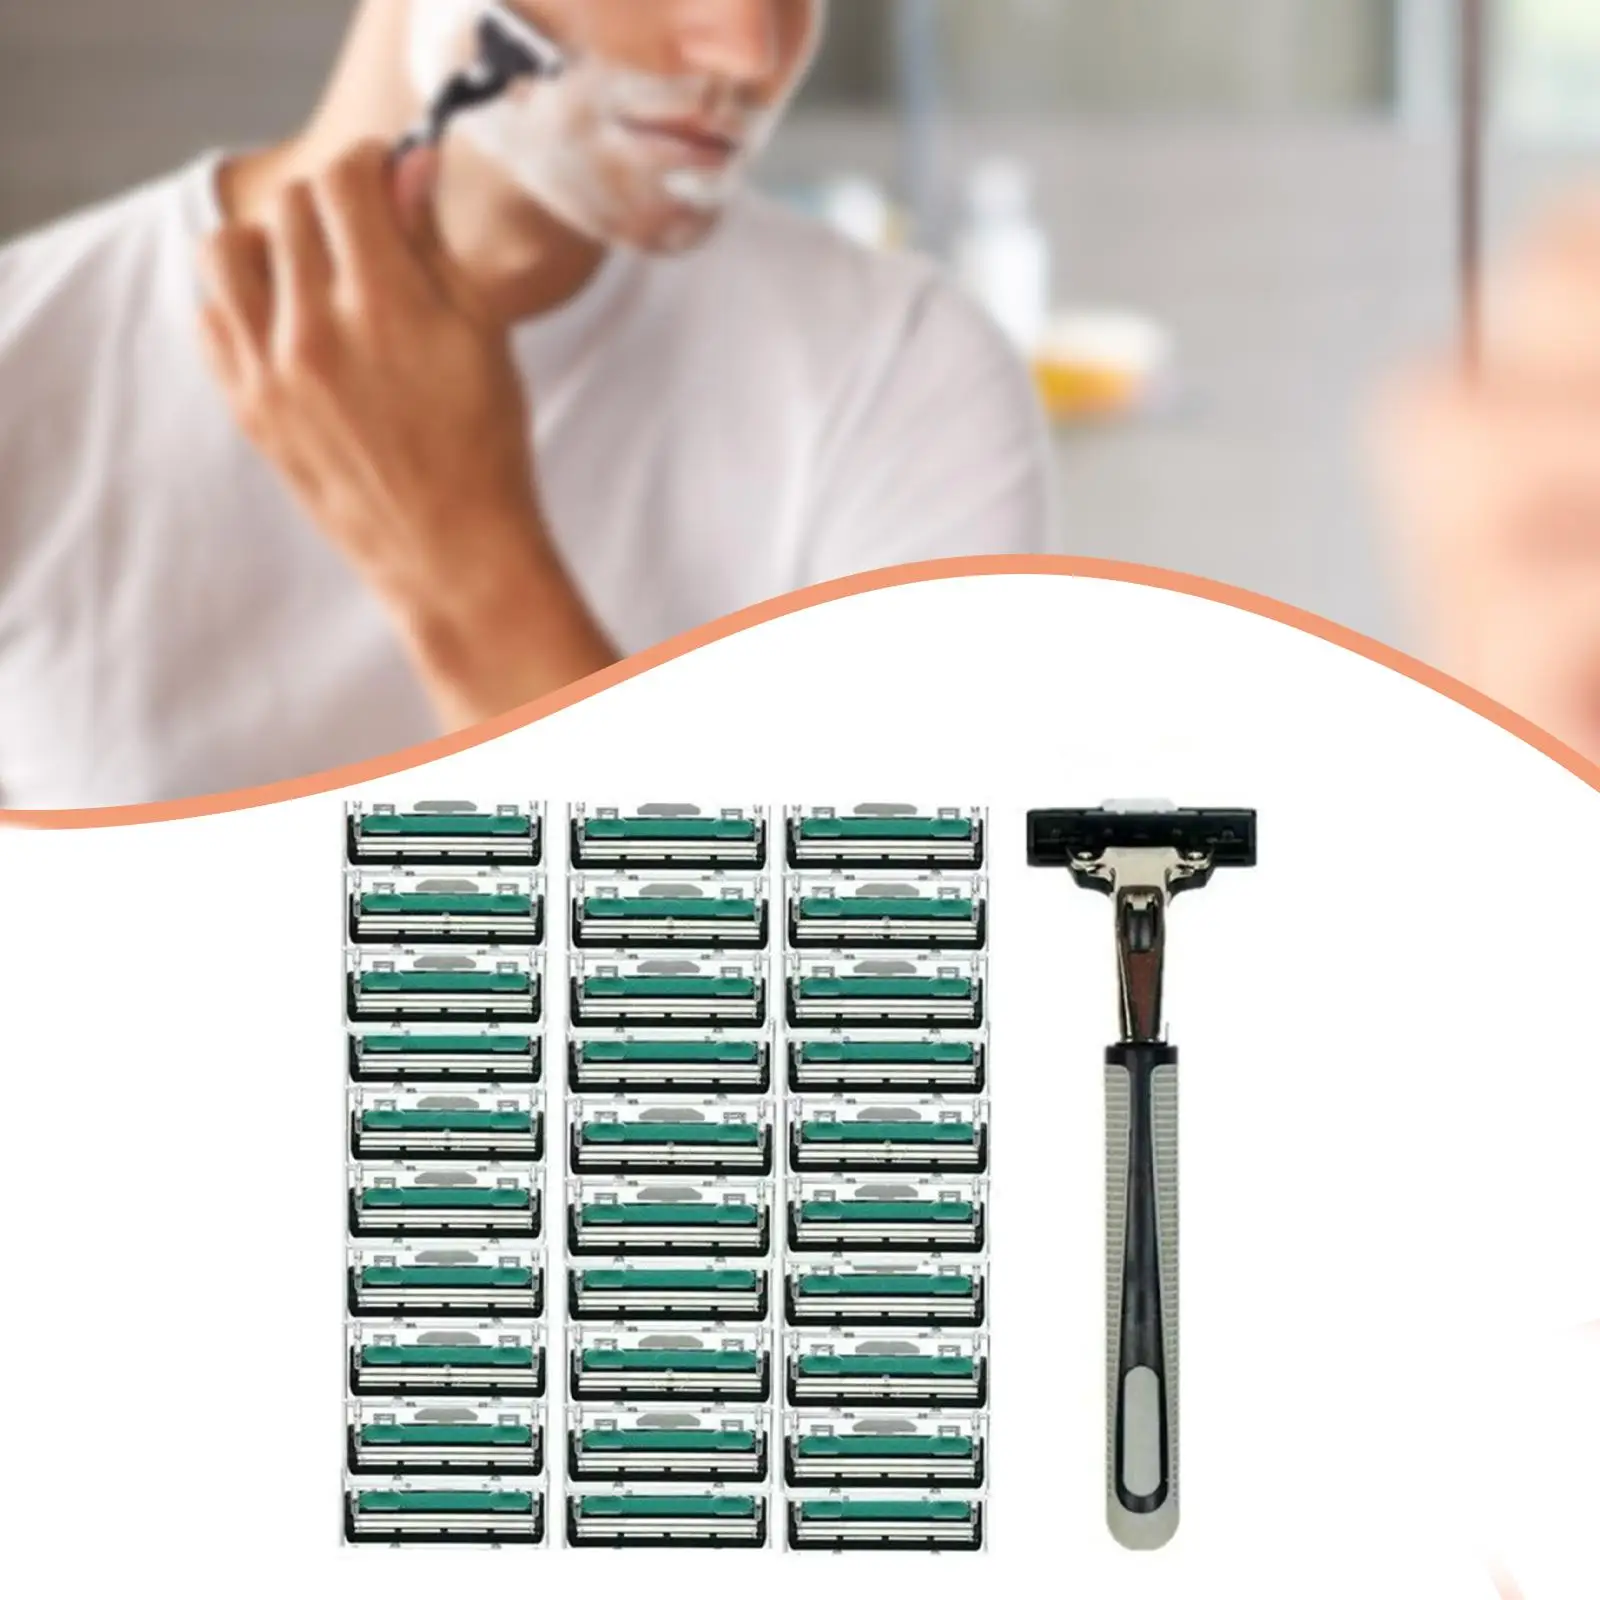 Double Edge Shaver Rustproof Anti Slip Handle Hair Remover Trimmer for Home